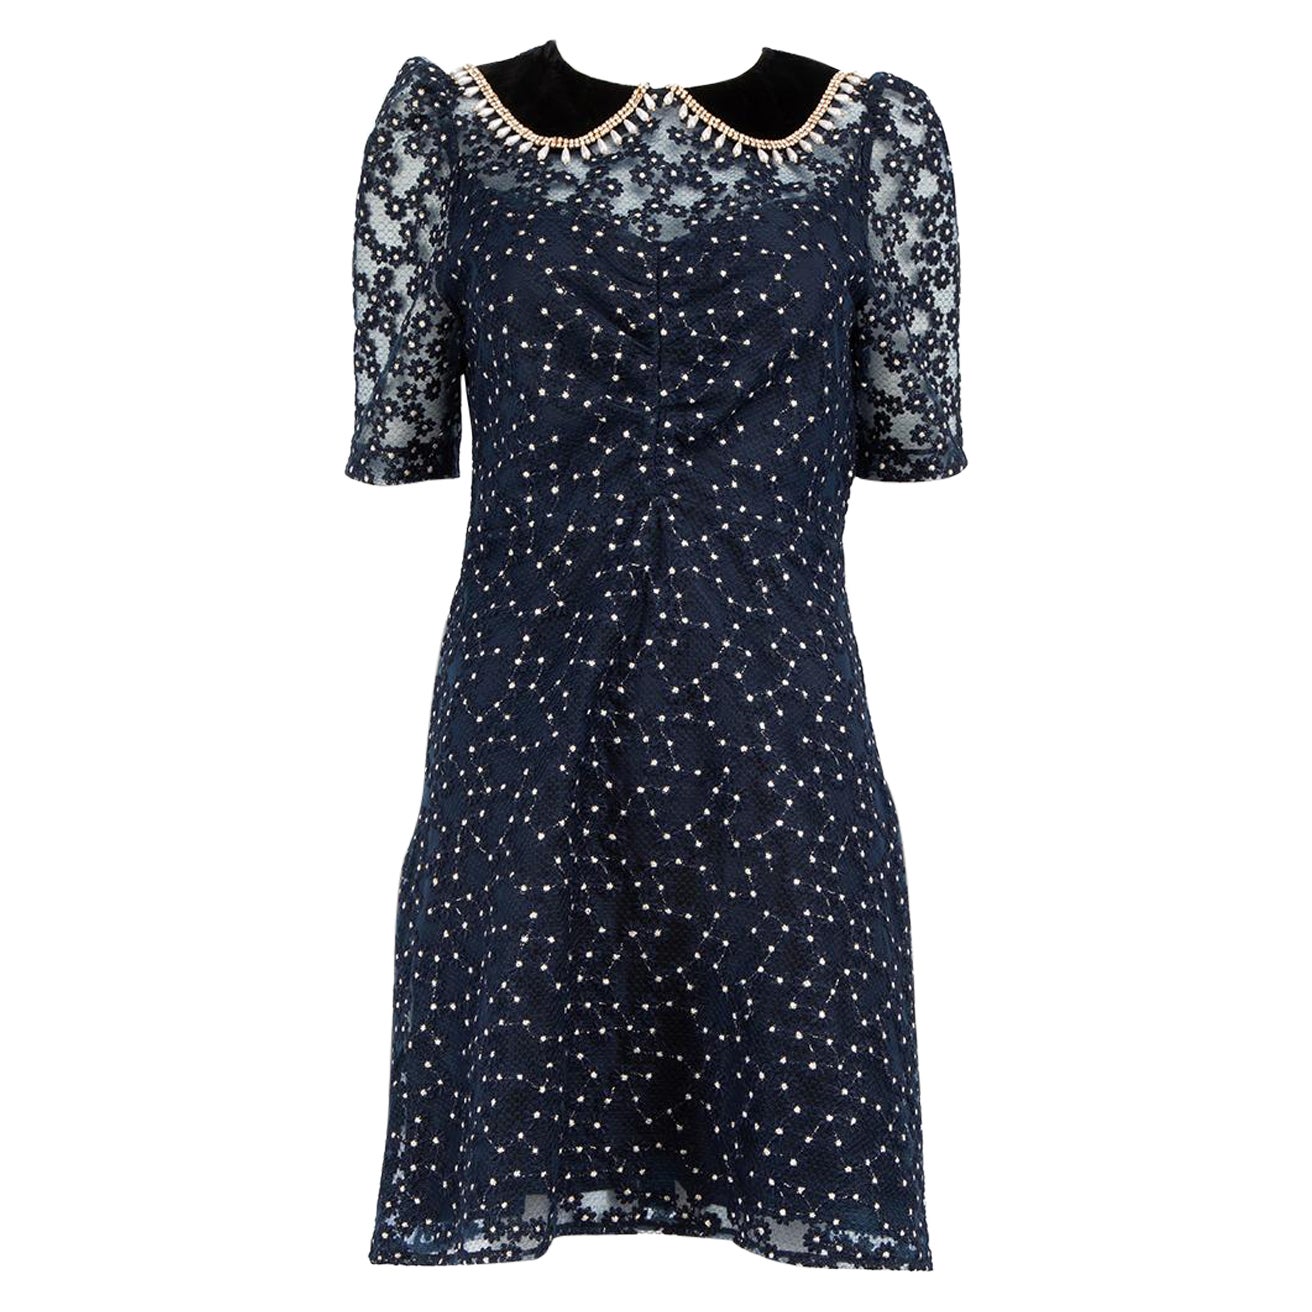 Sandro Navy Floral Lace Crystal Collar Dress Size M For Sale